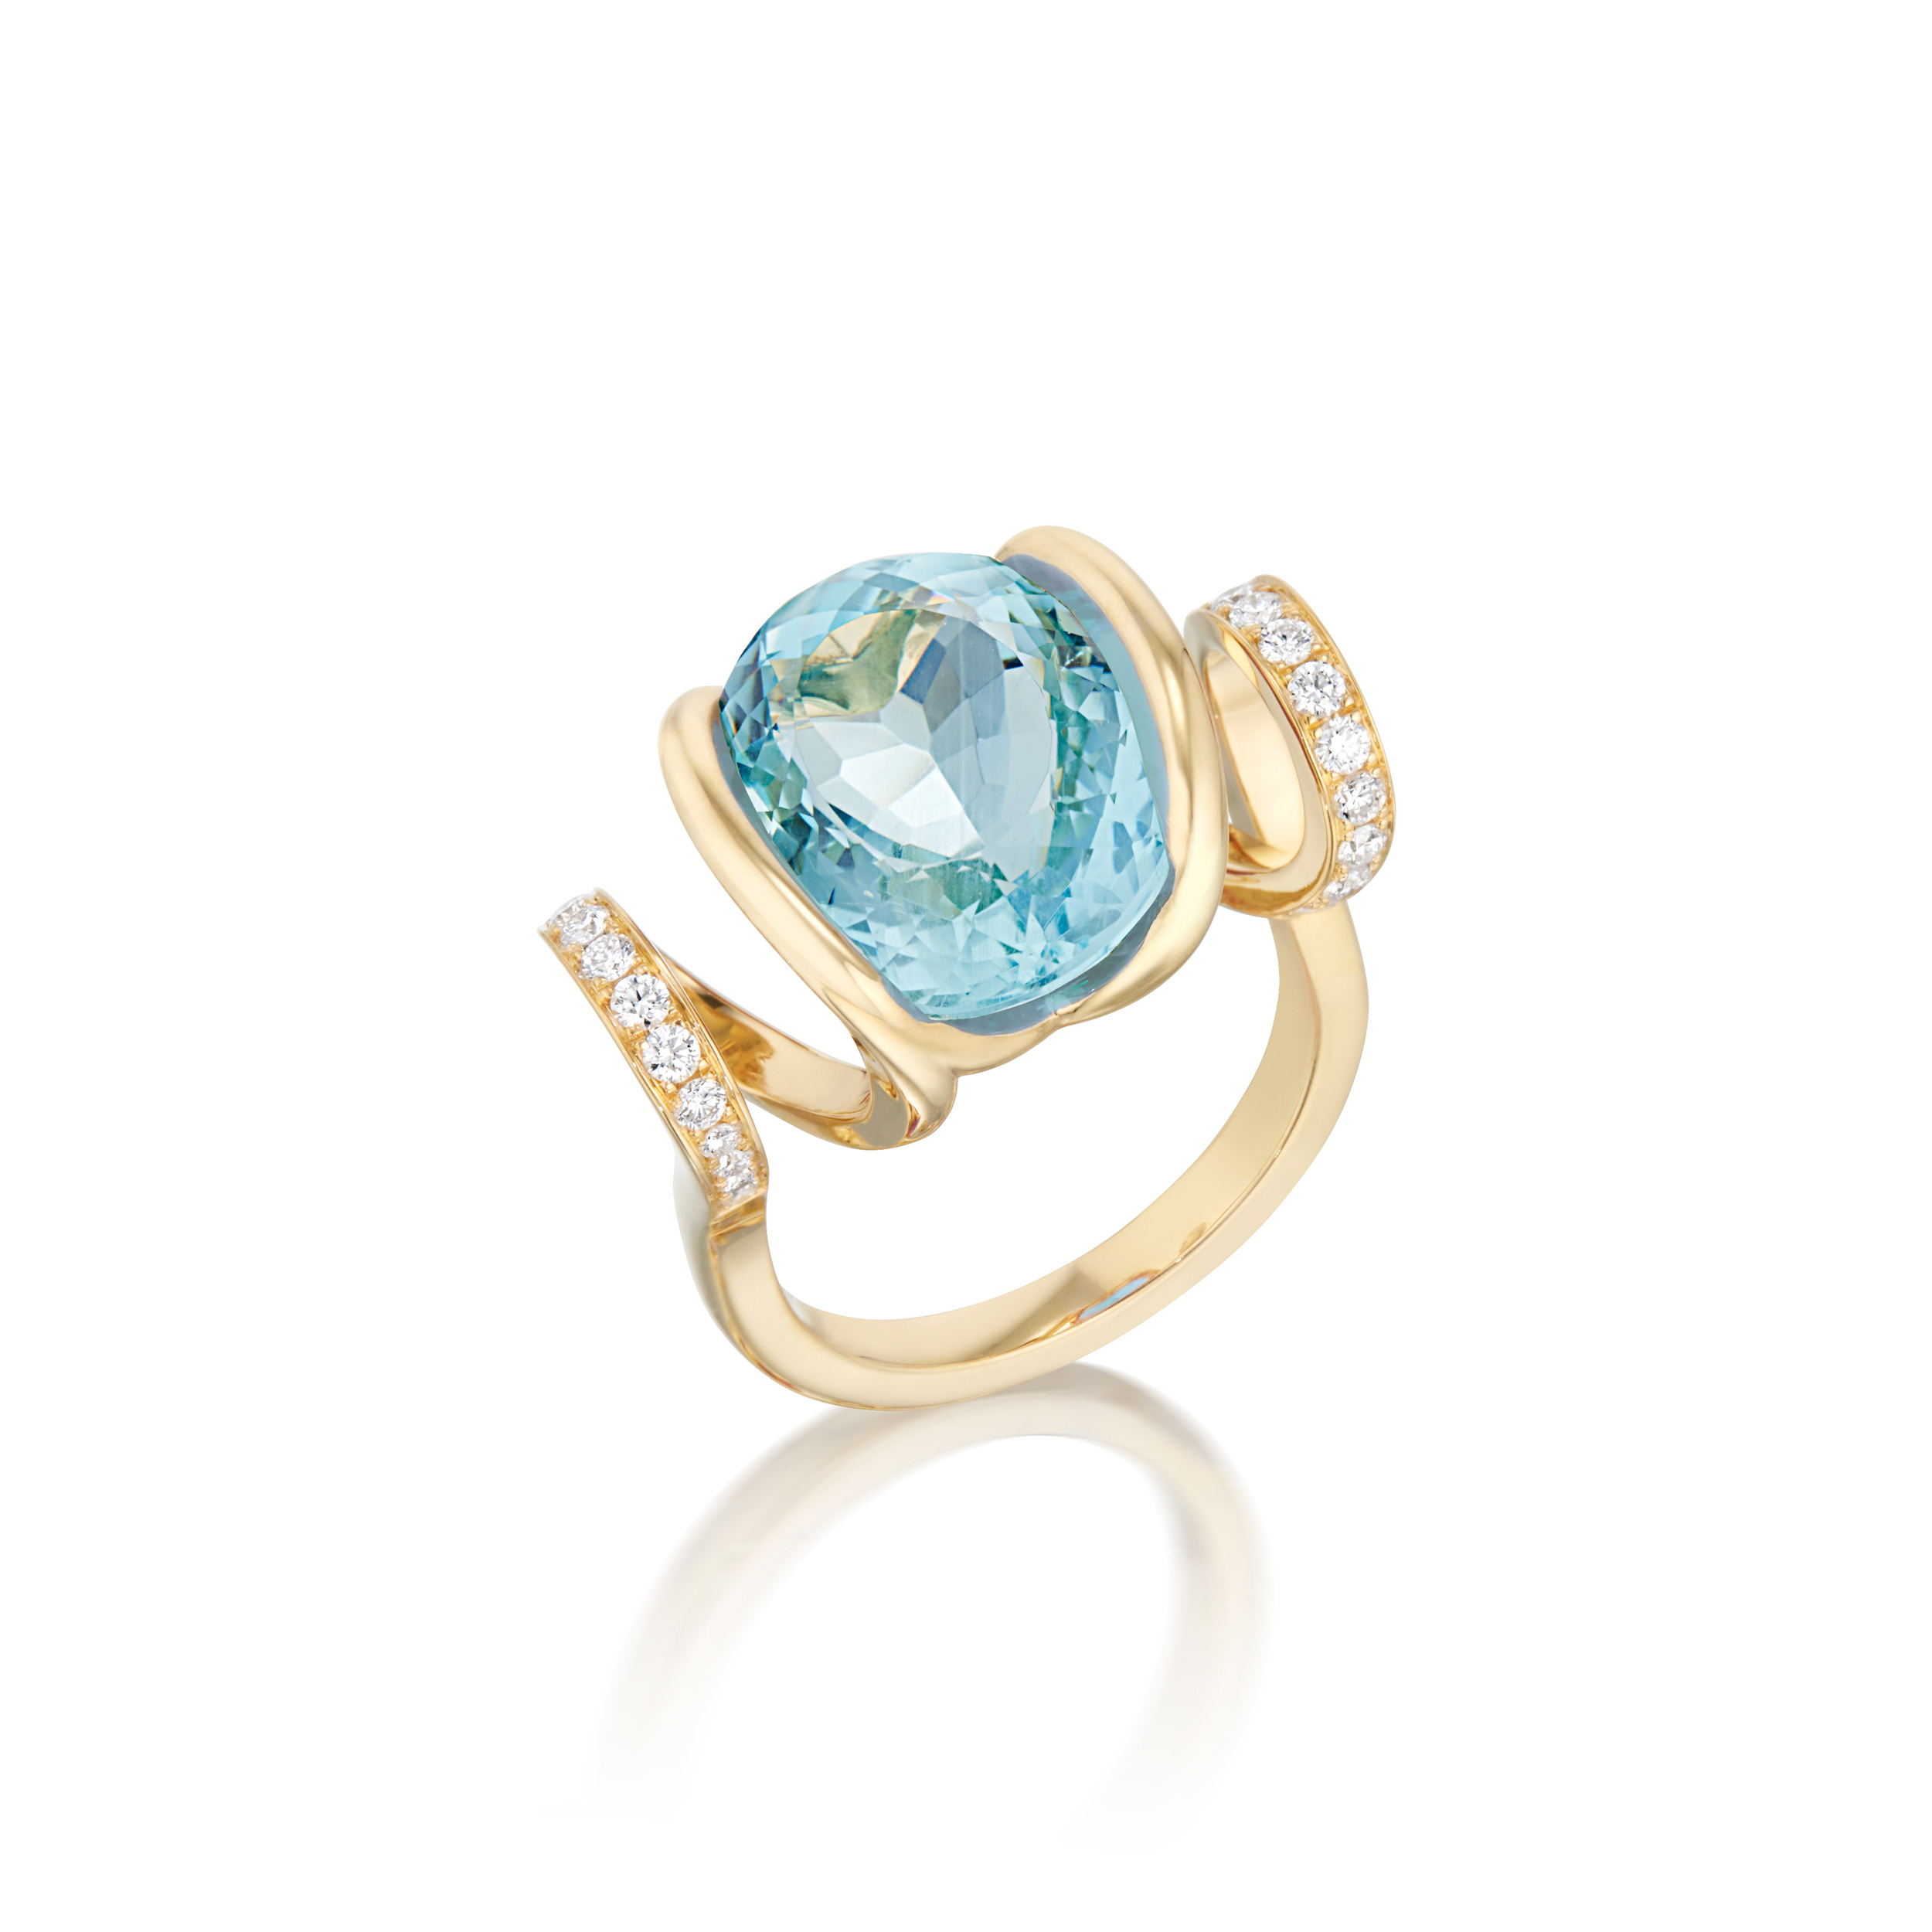 A top down view of the Ice Curl Ring with Aquamarine Center from Renisis by designer, Sardwell. It is made of 18K yellow gold with aquamarine and pavé diamonds.